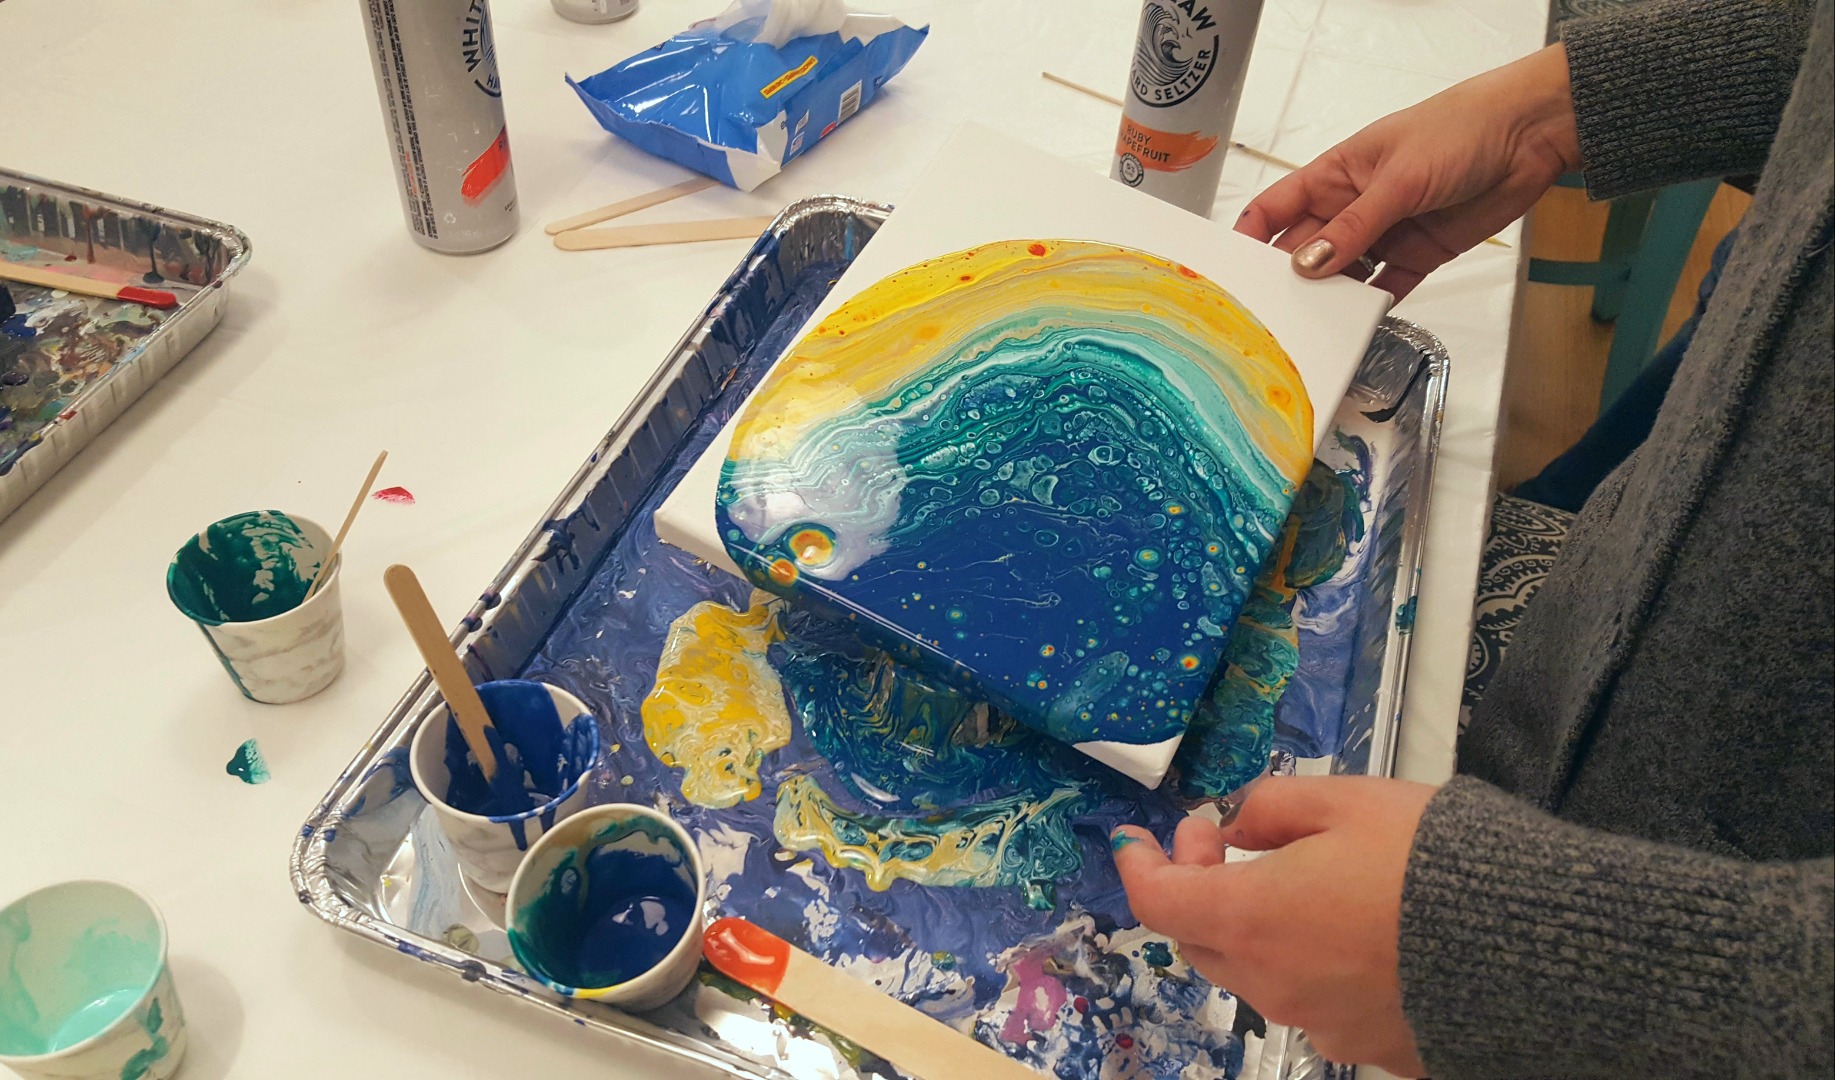 Acrylic Pour Paint Night at Alpha and Omega